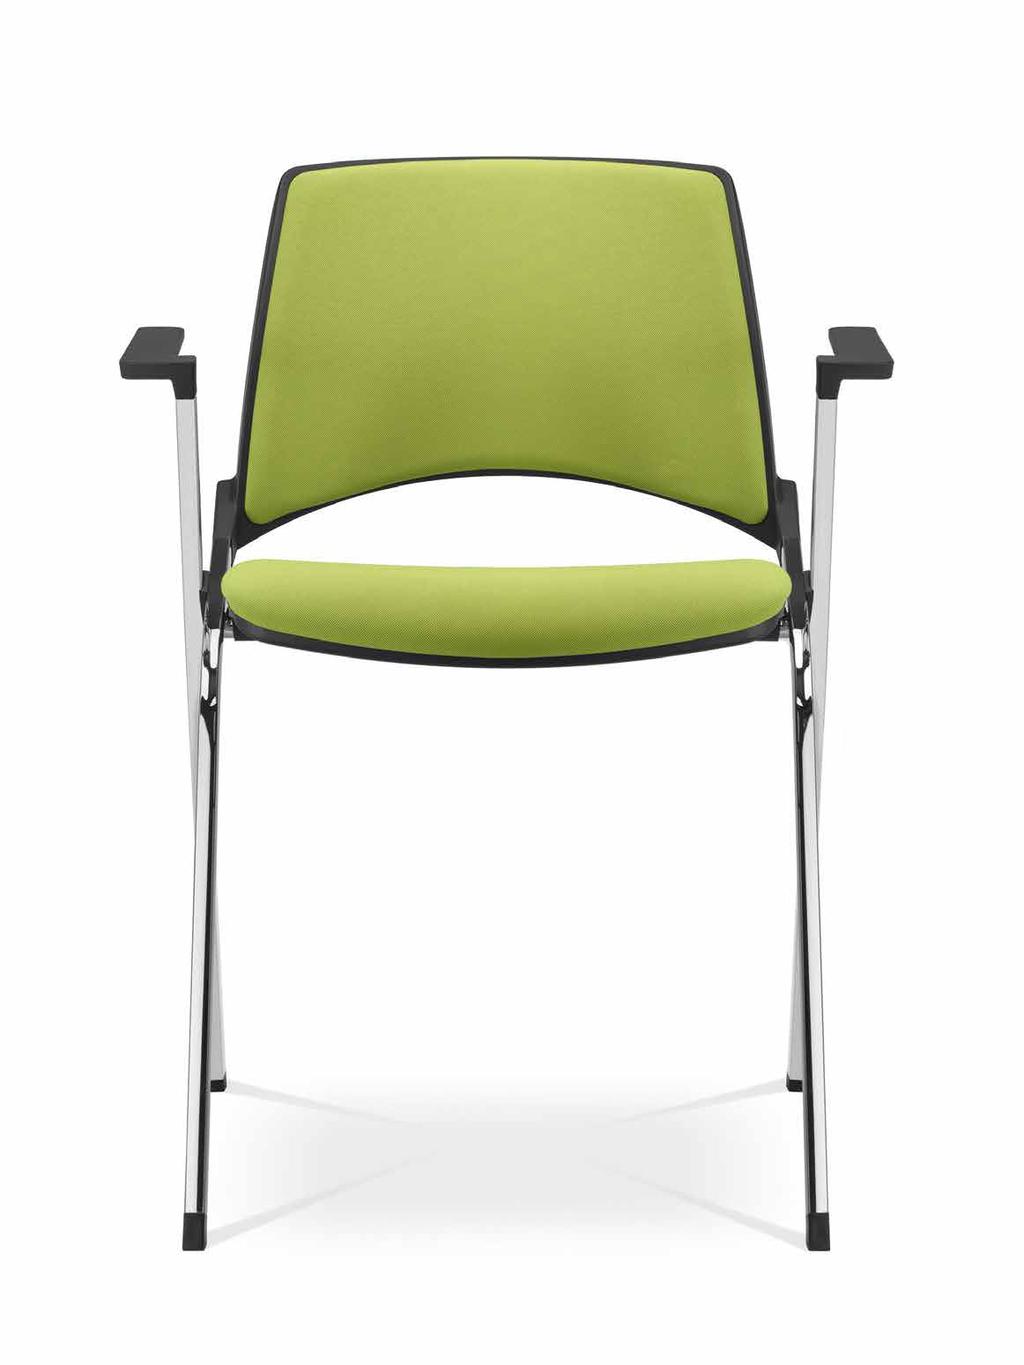 JUNO Design by Angelo Pinaffo Designed by Angelo Pinaffo, June is simply a superb, inventive, multifunctional chair. Chairs in the Juno series lend themselves to a variety of uses.